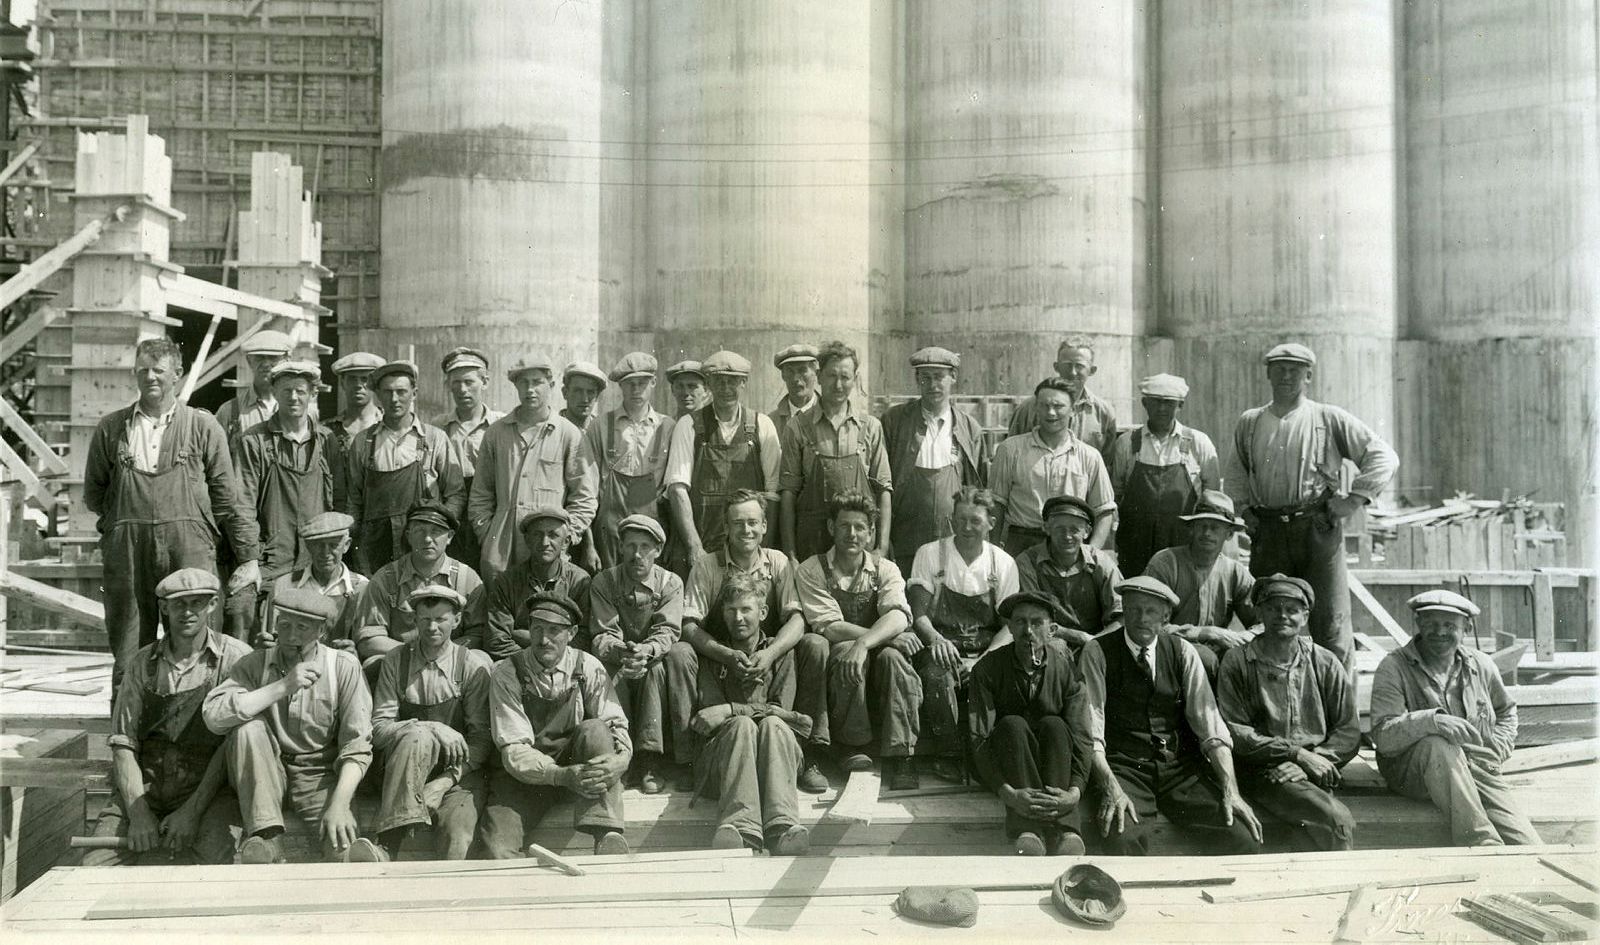 Workers in front of the silo in 1935